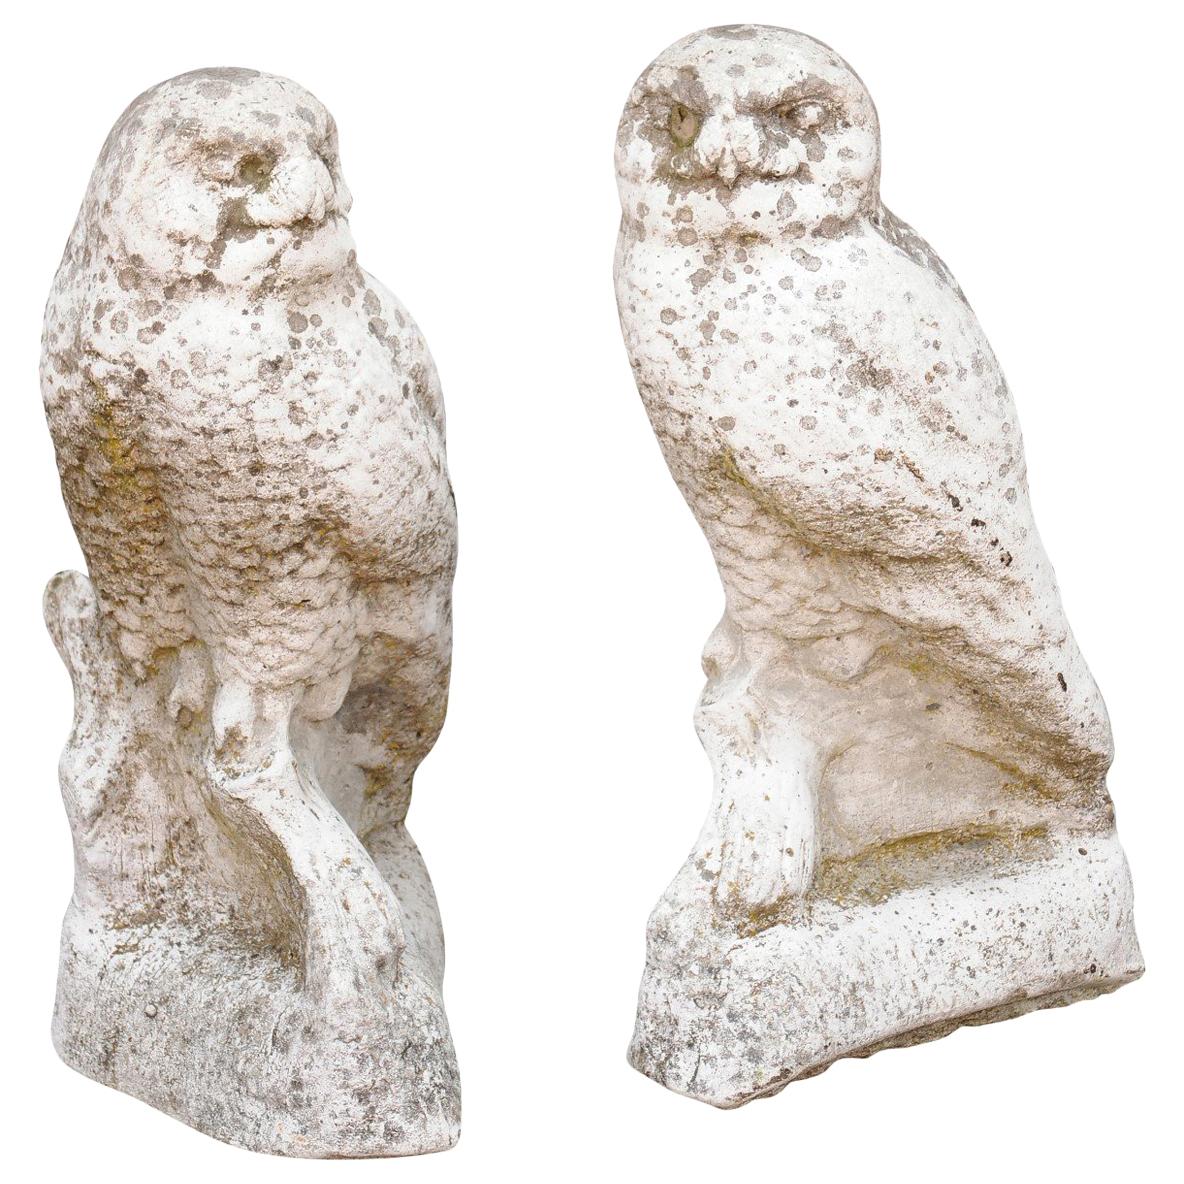 French Owl Composition Sculpture, circa 1950 with Weathered Appearance